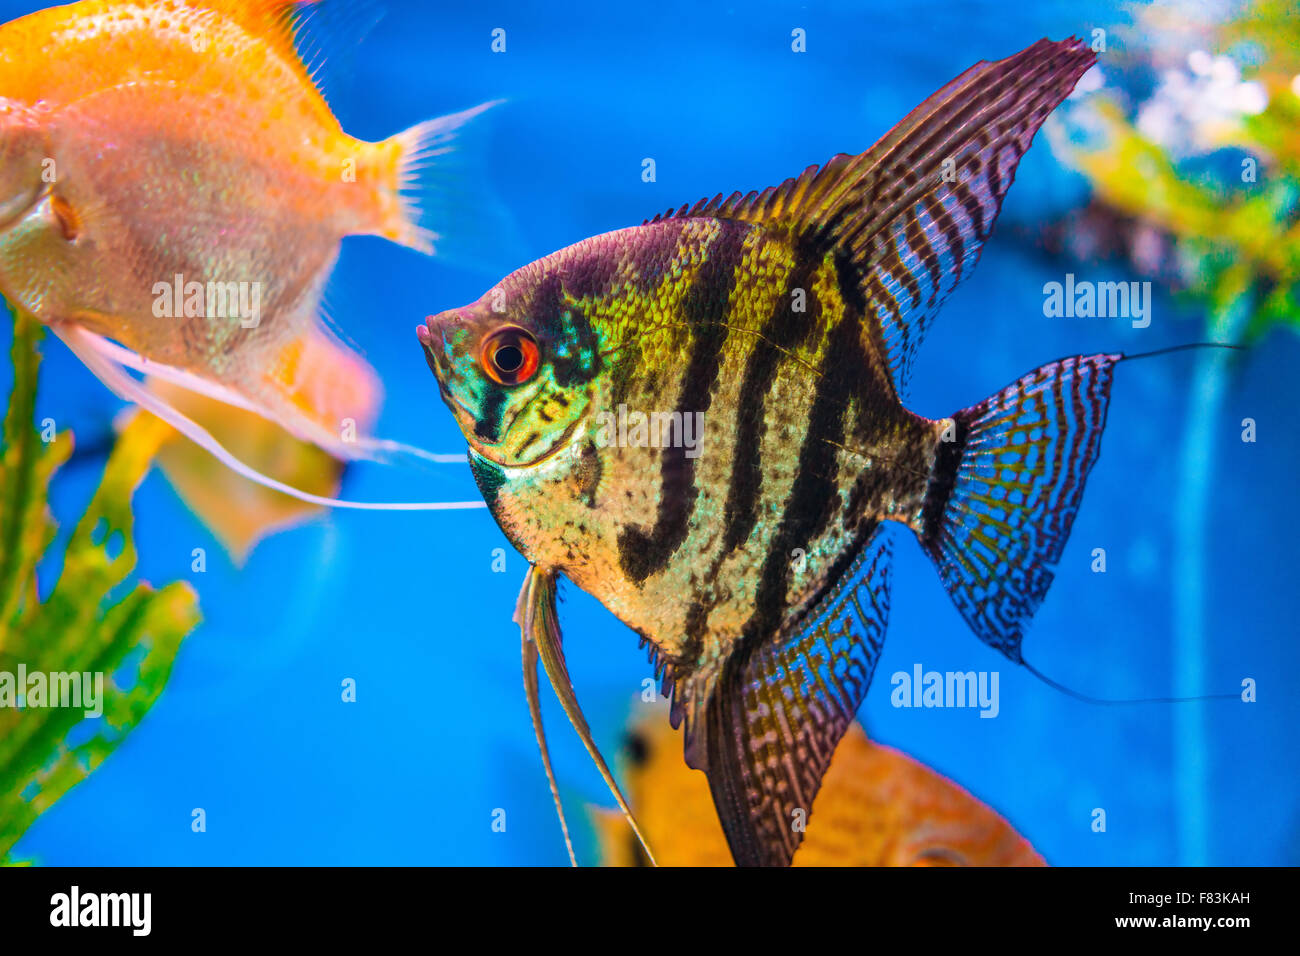 Marbled black and yellow long finned angel fish. Stock Photo